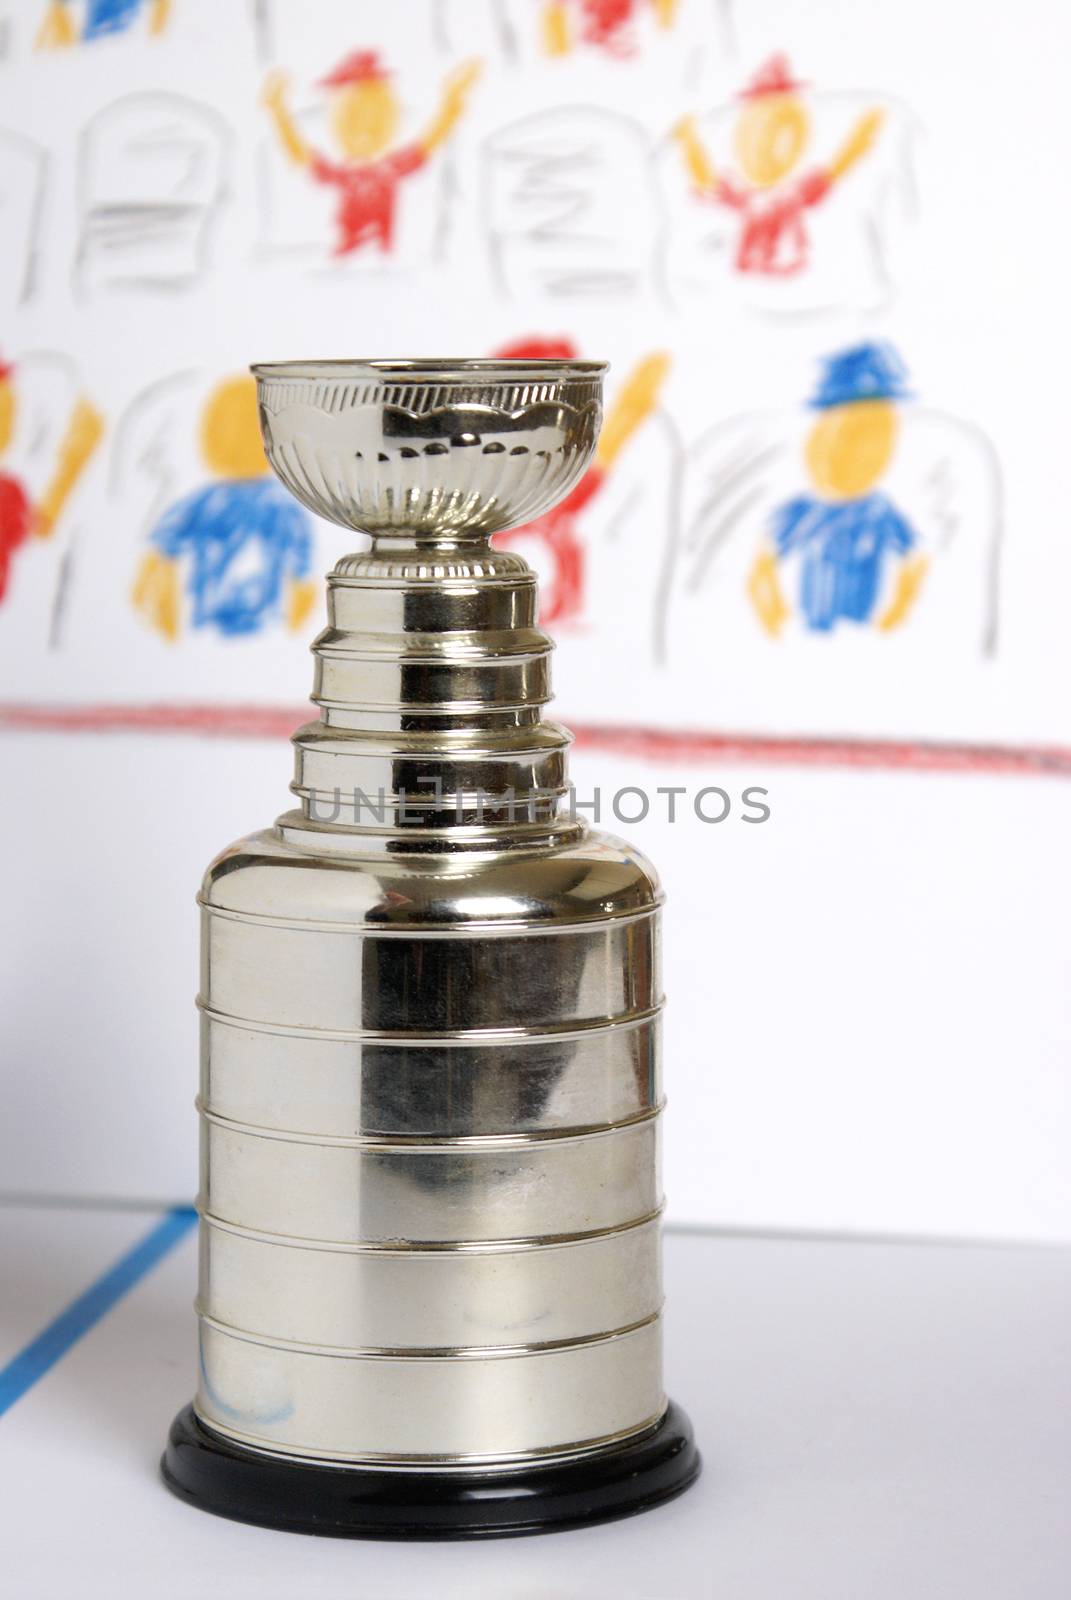 A closeup view of a replica Lord Stanley Hockey Trophy on a cartoon style backdrop.